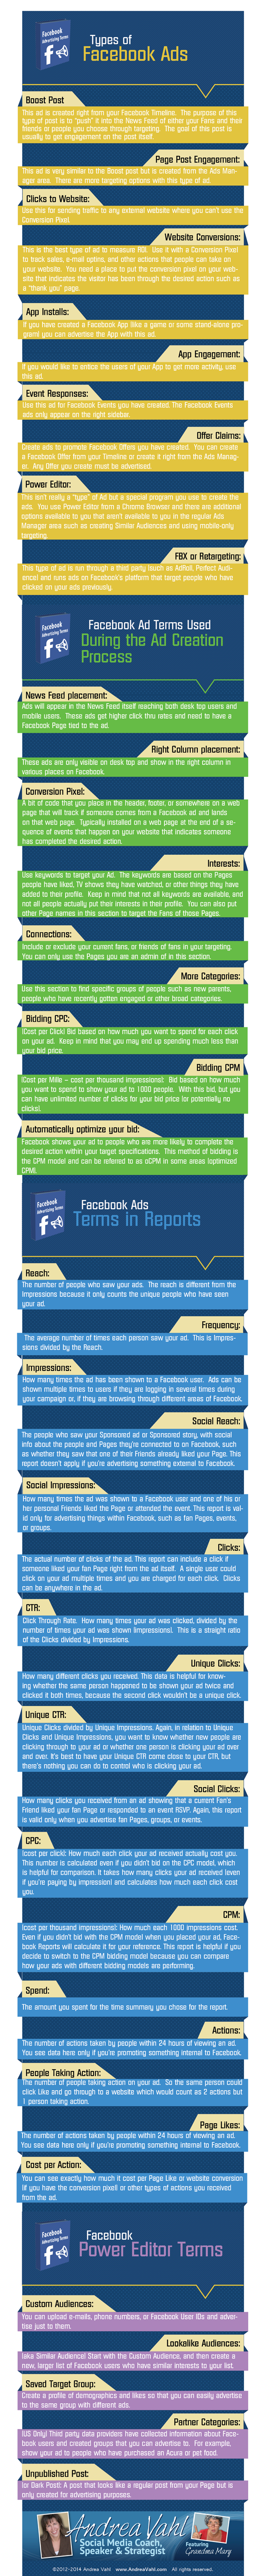 Facebook Advertising Terms Infographic